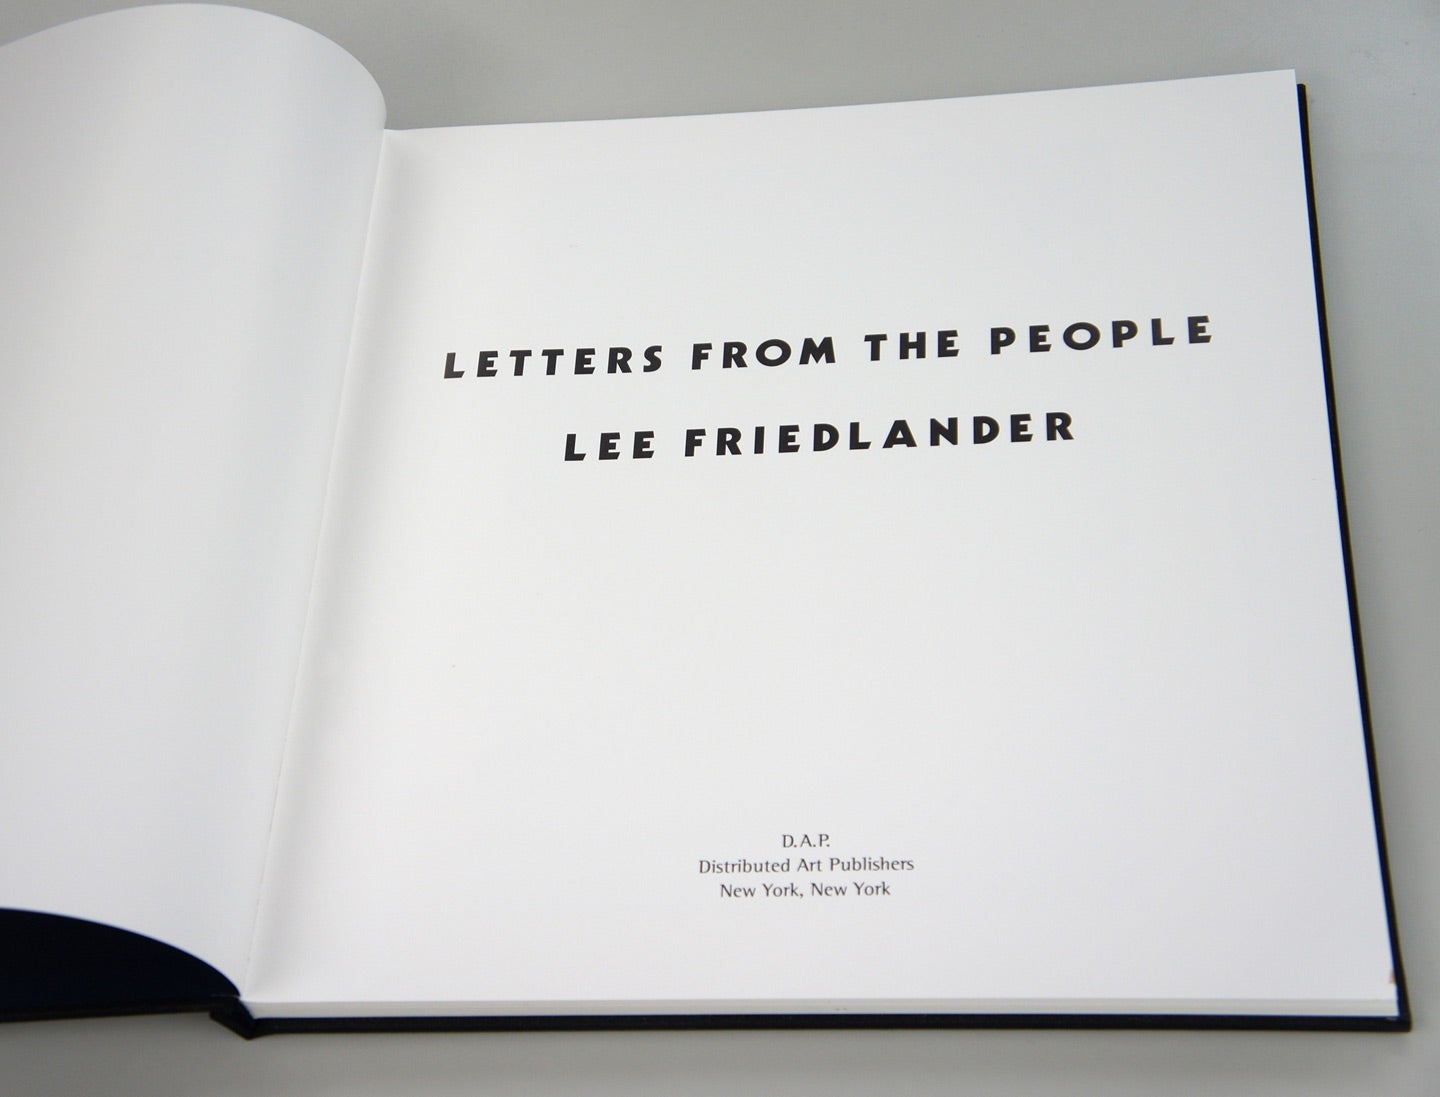 Lee Friedlander: Letters from the People (Special Limited Edition with One Vintage Gelatin Silver Print: "G")